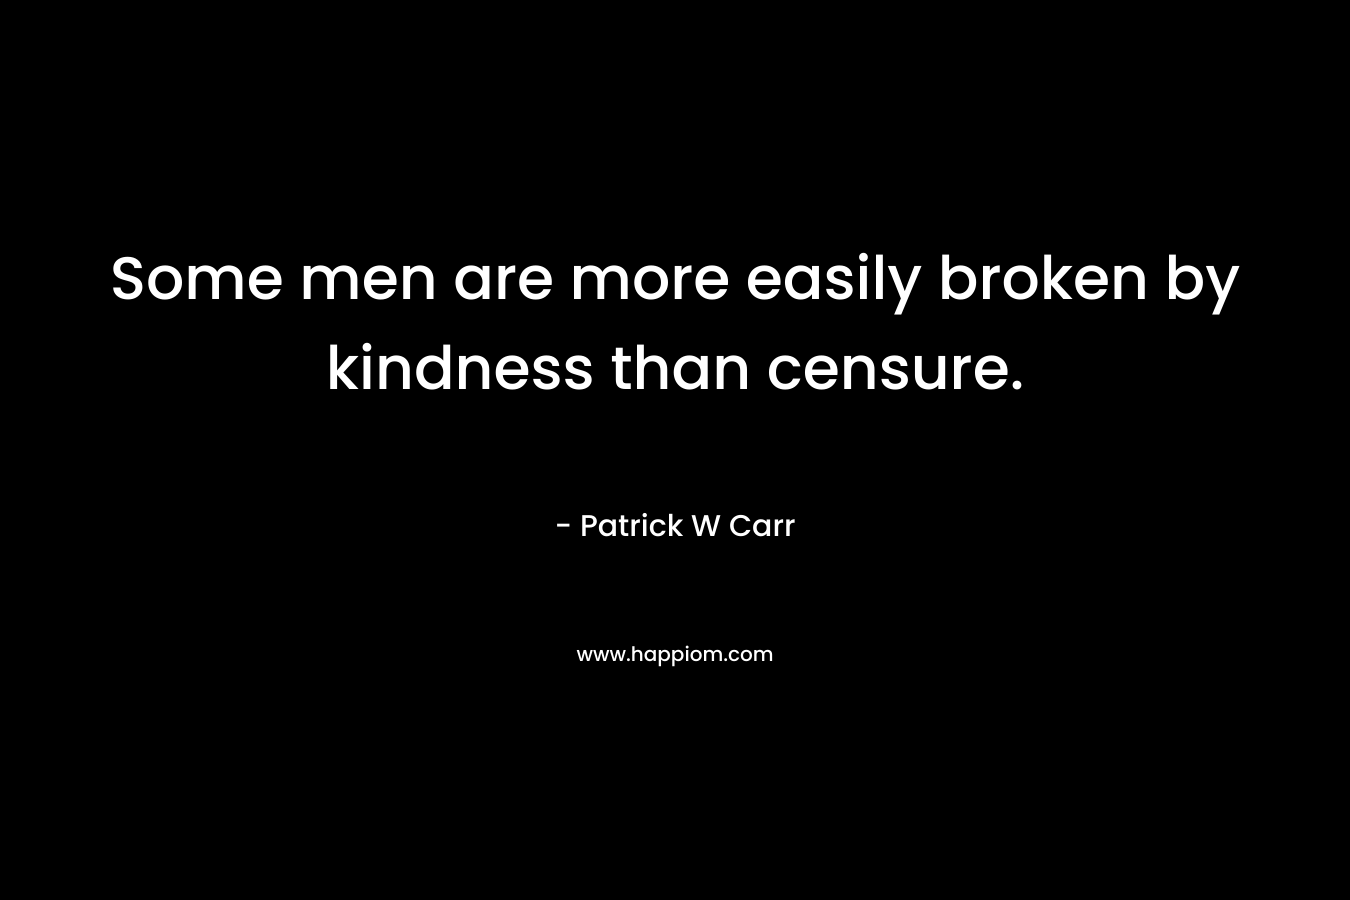 Some men are more easily broken by kindness than censure.